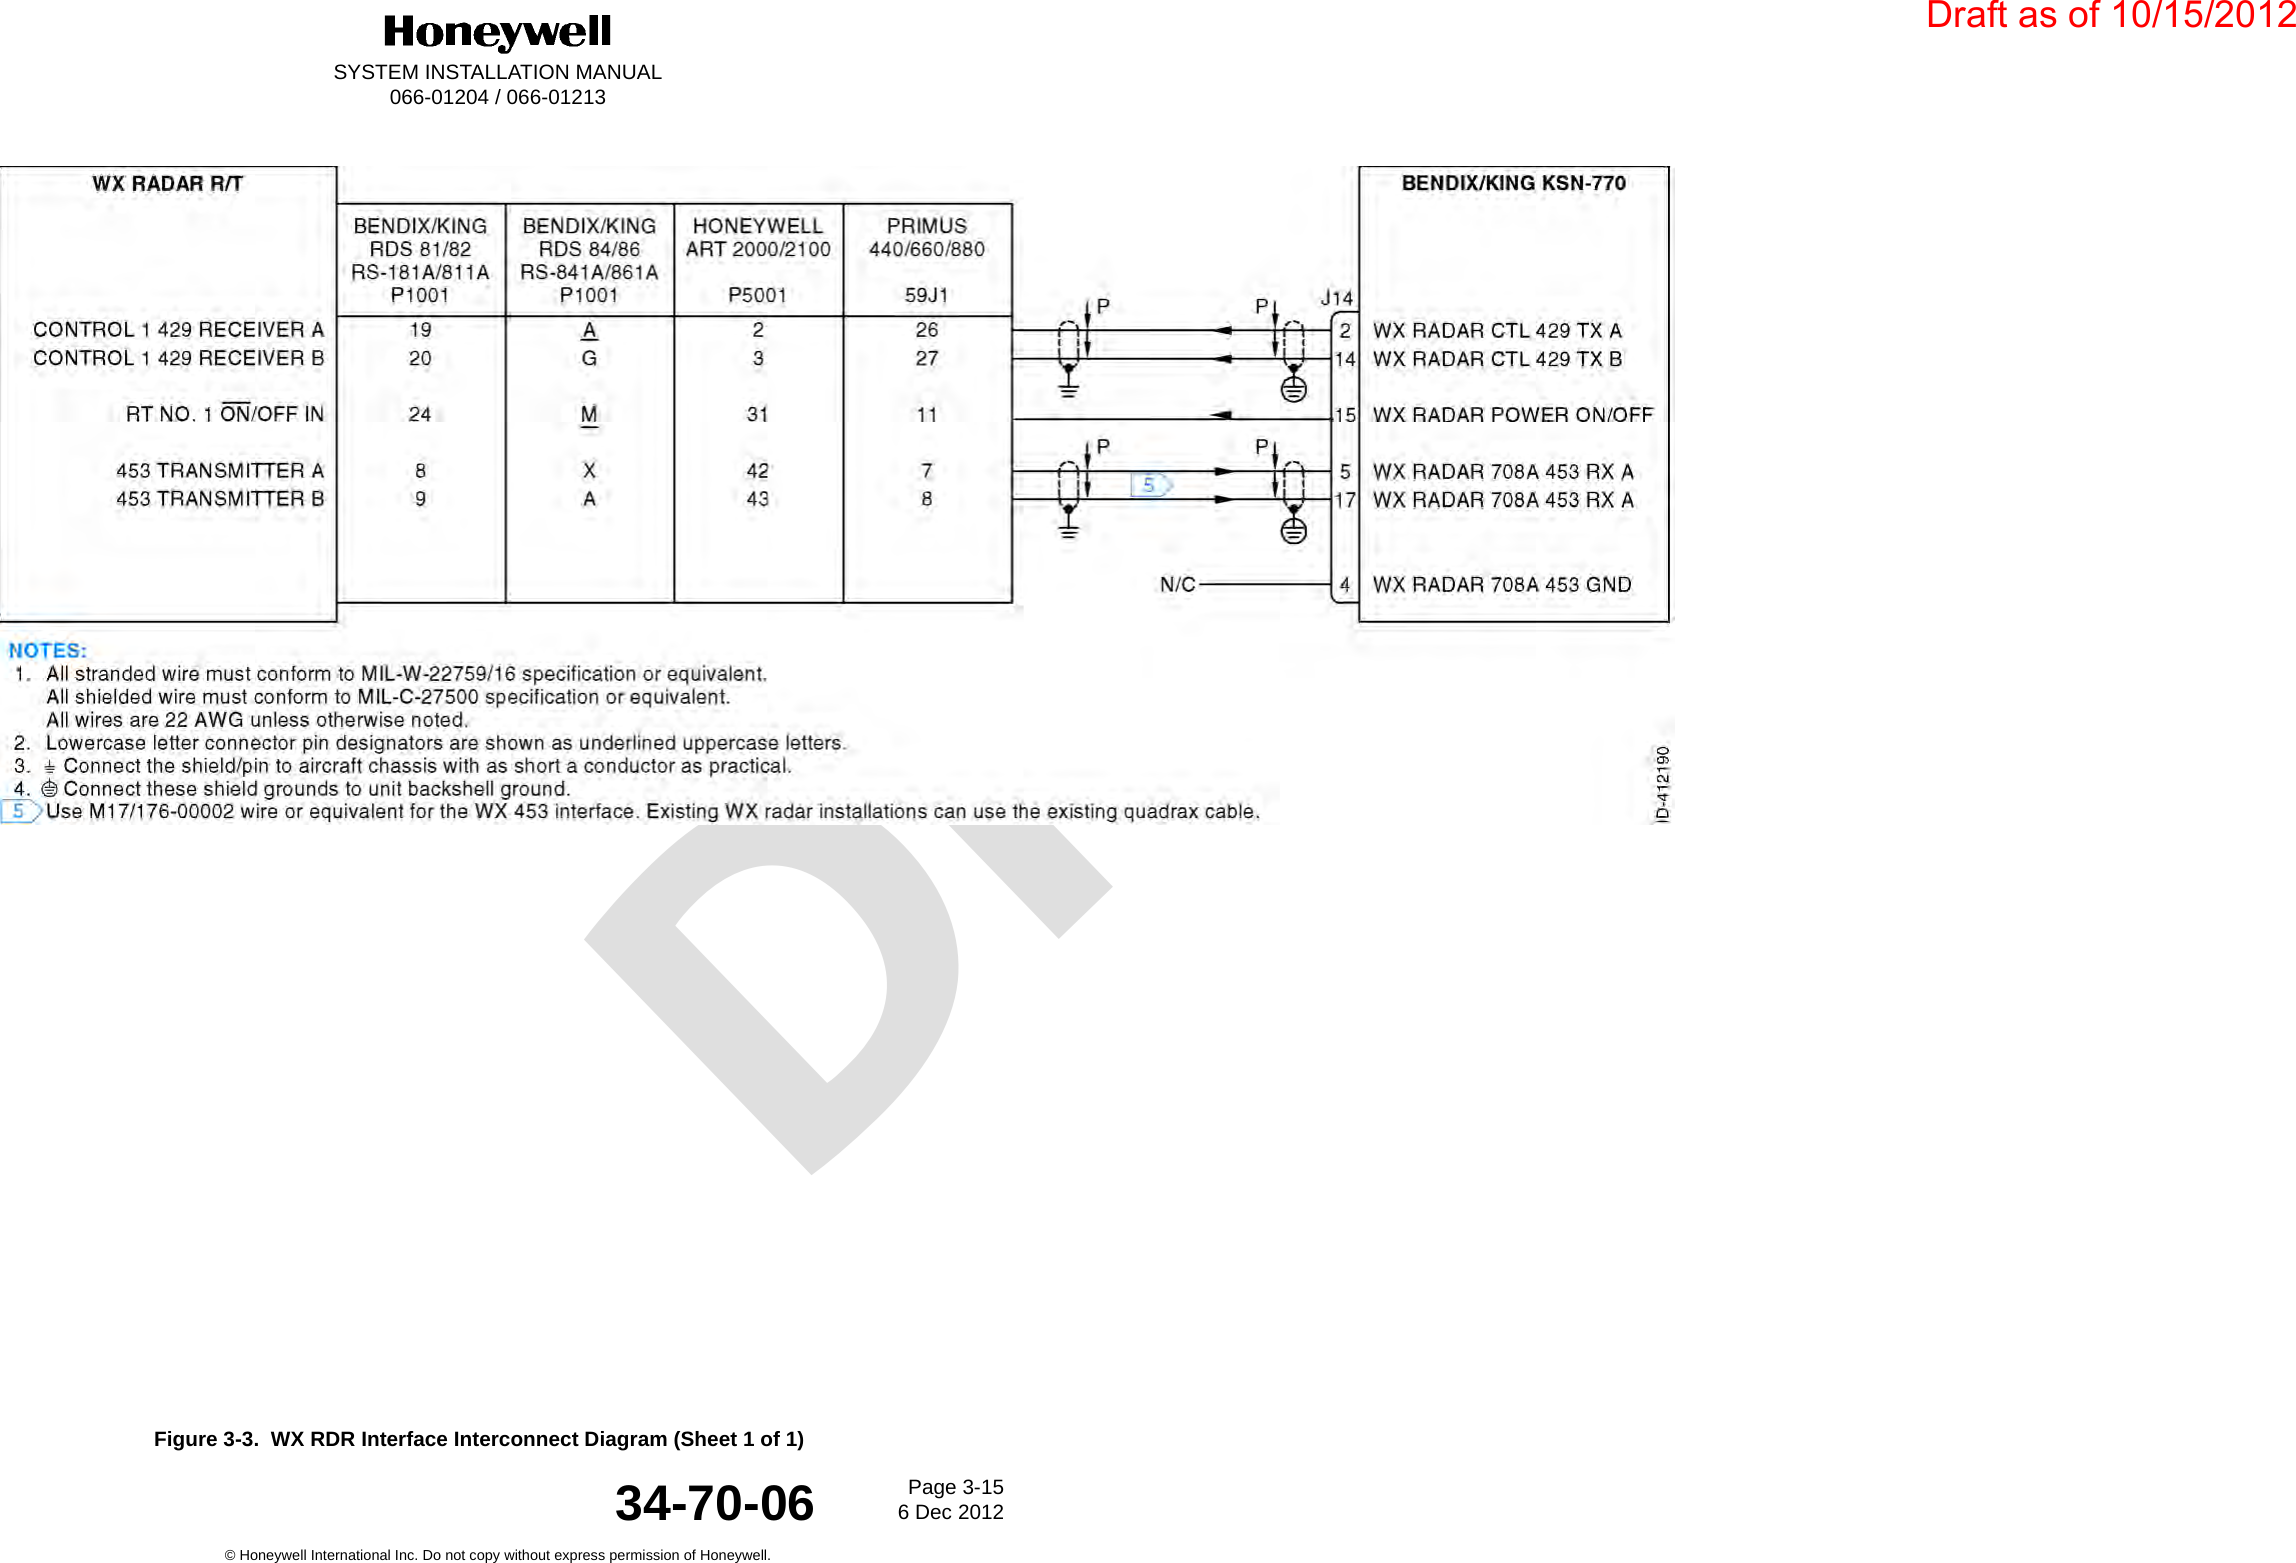 DraftSYSTEM INSTALLATION MANUAL066-01204 / 066-01213Page 3-156 Dec 2012© Honeywell International Inc. Do not copy without express permission of Honeywell.34-70-06Figure 3-3.  WX RDR Interface Interconnect Diagram (Sheet 1 of 1)Draft as of 10/15/2012